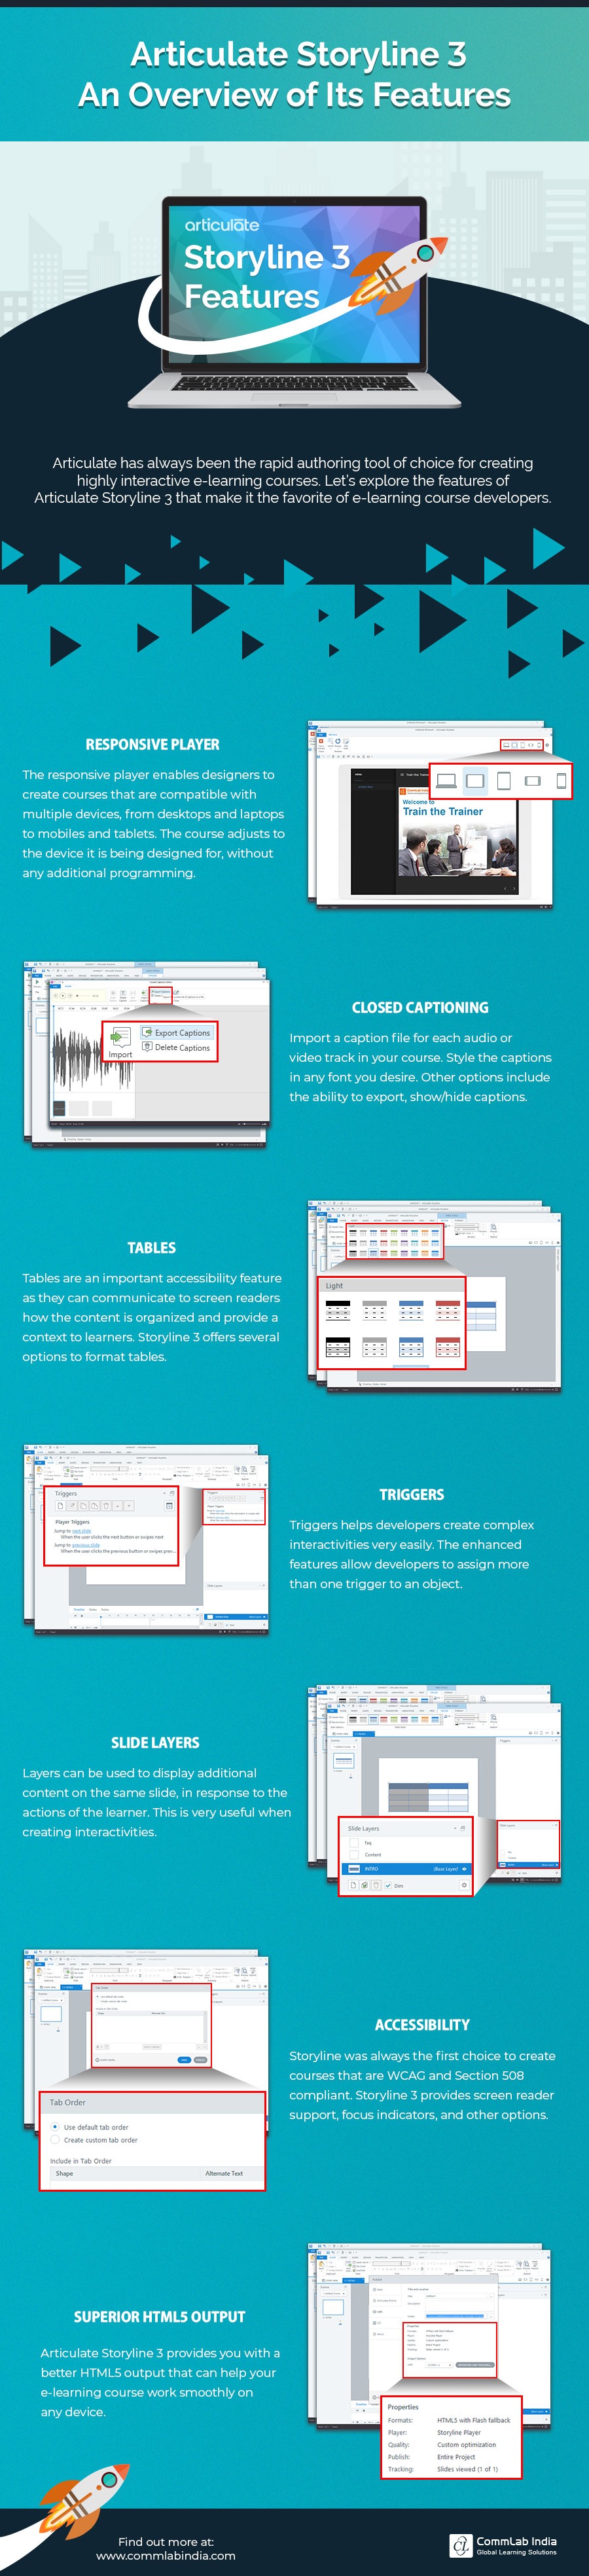 Articulate Storyline 3: An Overview of Its Features [Infographic]